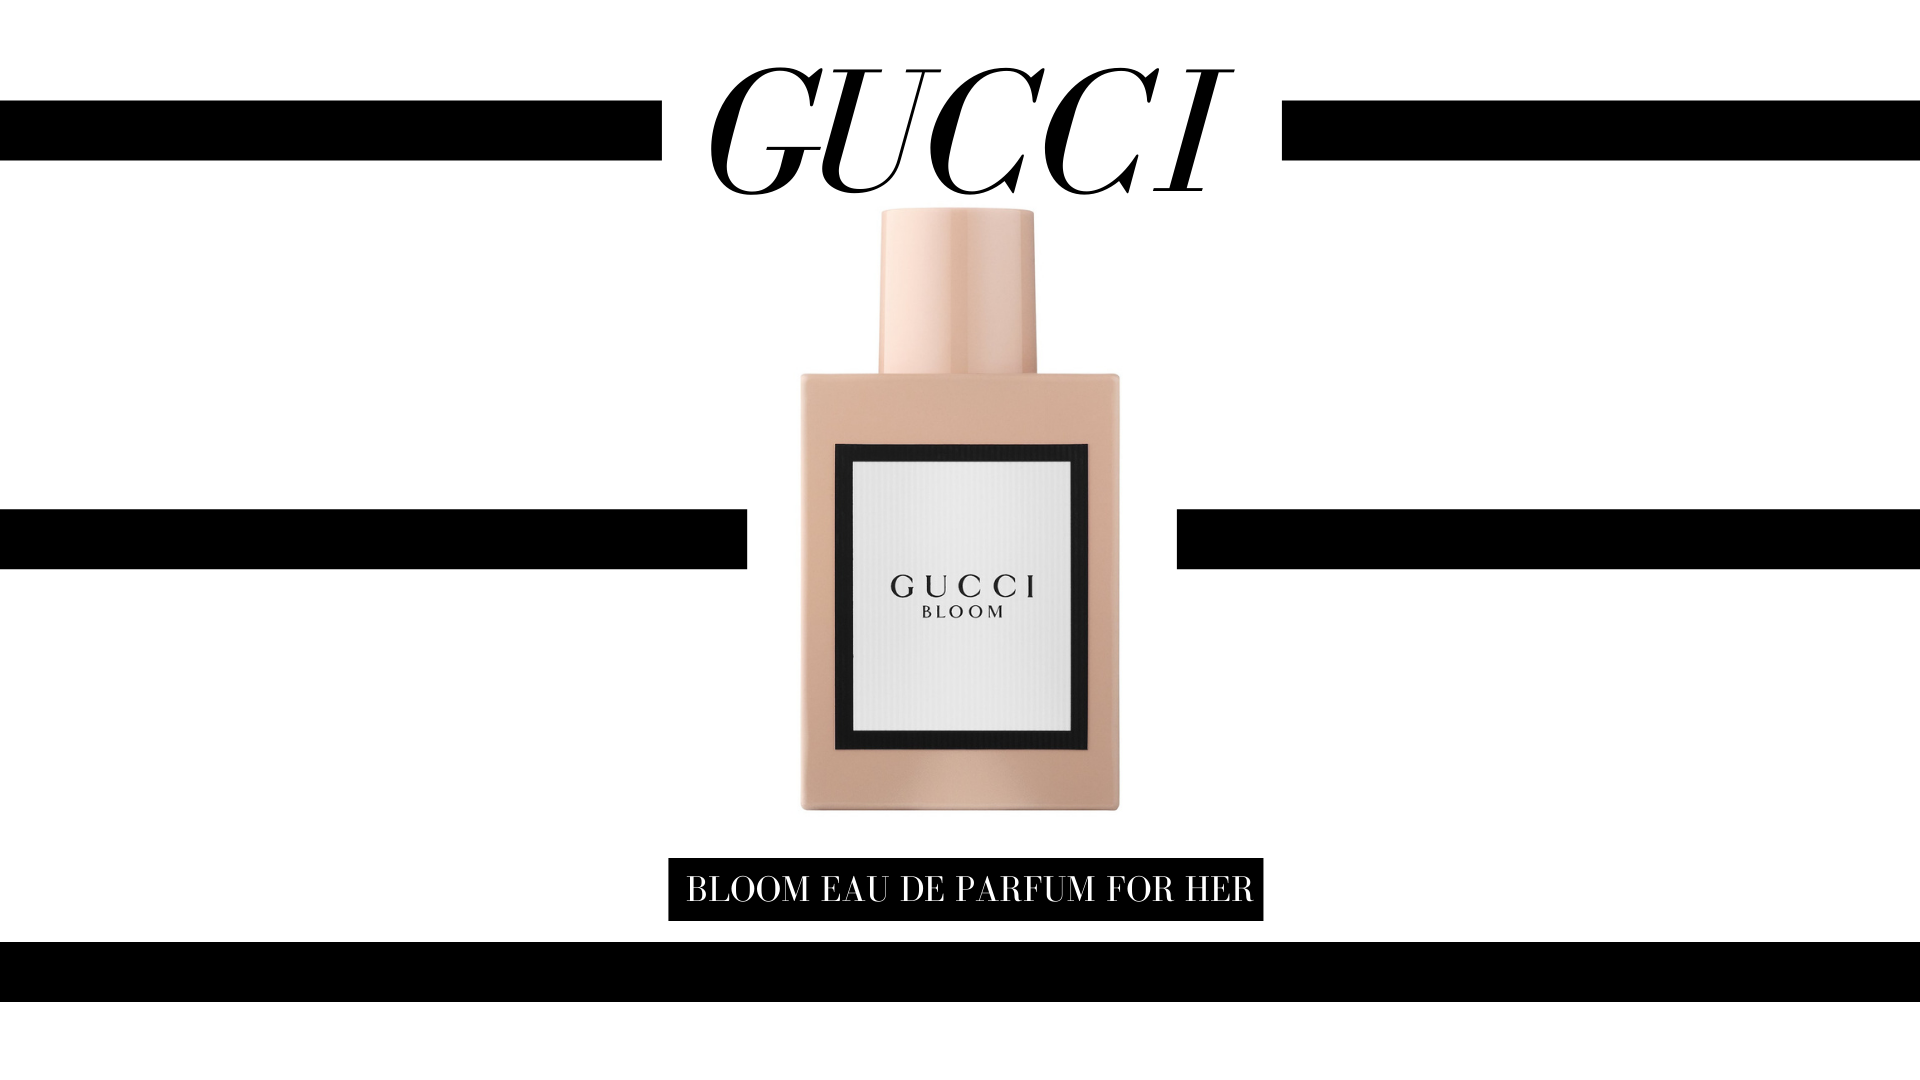 Bloom by Gucci is such an exciting fragrance! We didn't expect this from Gucci - it was definitely a good surprise! With keynotes like Rangoon Creeper, Jasmine Bud, and Tuberose, this is a rich scent with a powdery feel and a floral edge. It is, for sure, a fantastic fragrance for spring!